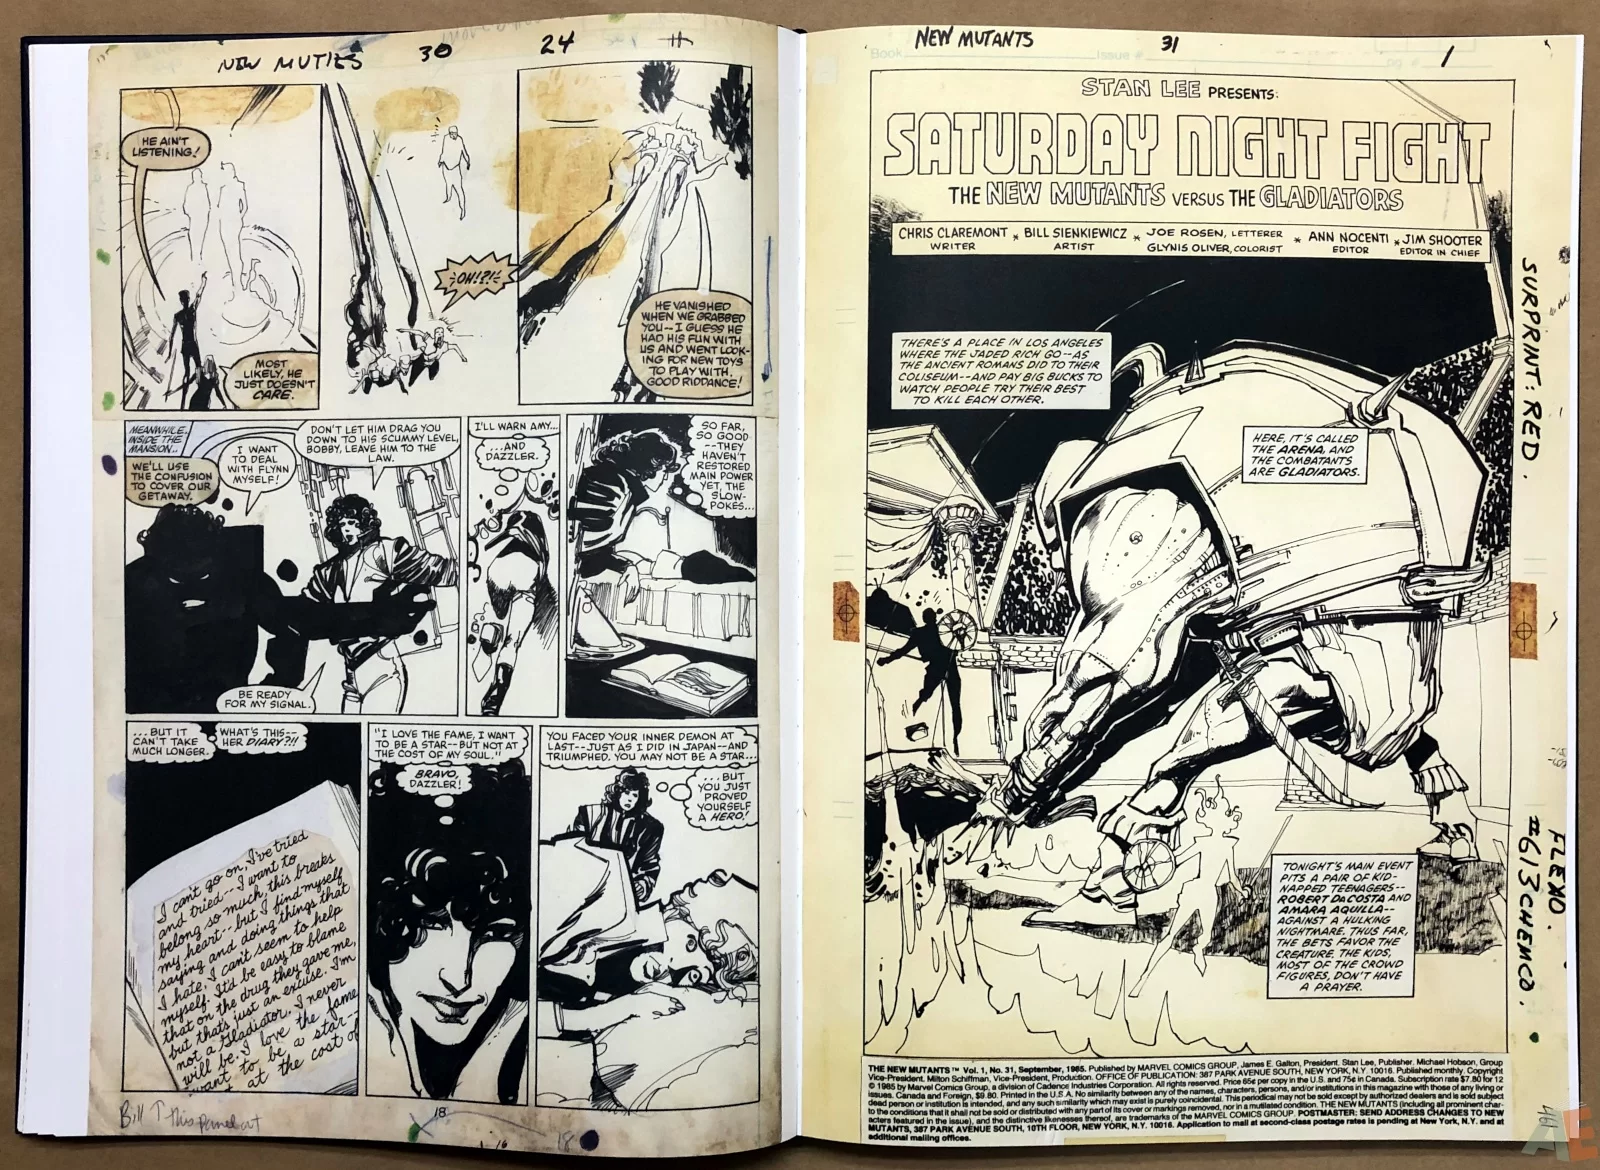 Bill Sienkiewicz’s Mutants and Moon Knights… and Assassins… Artifact Edition